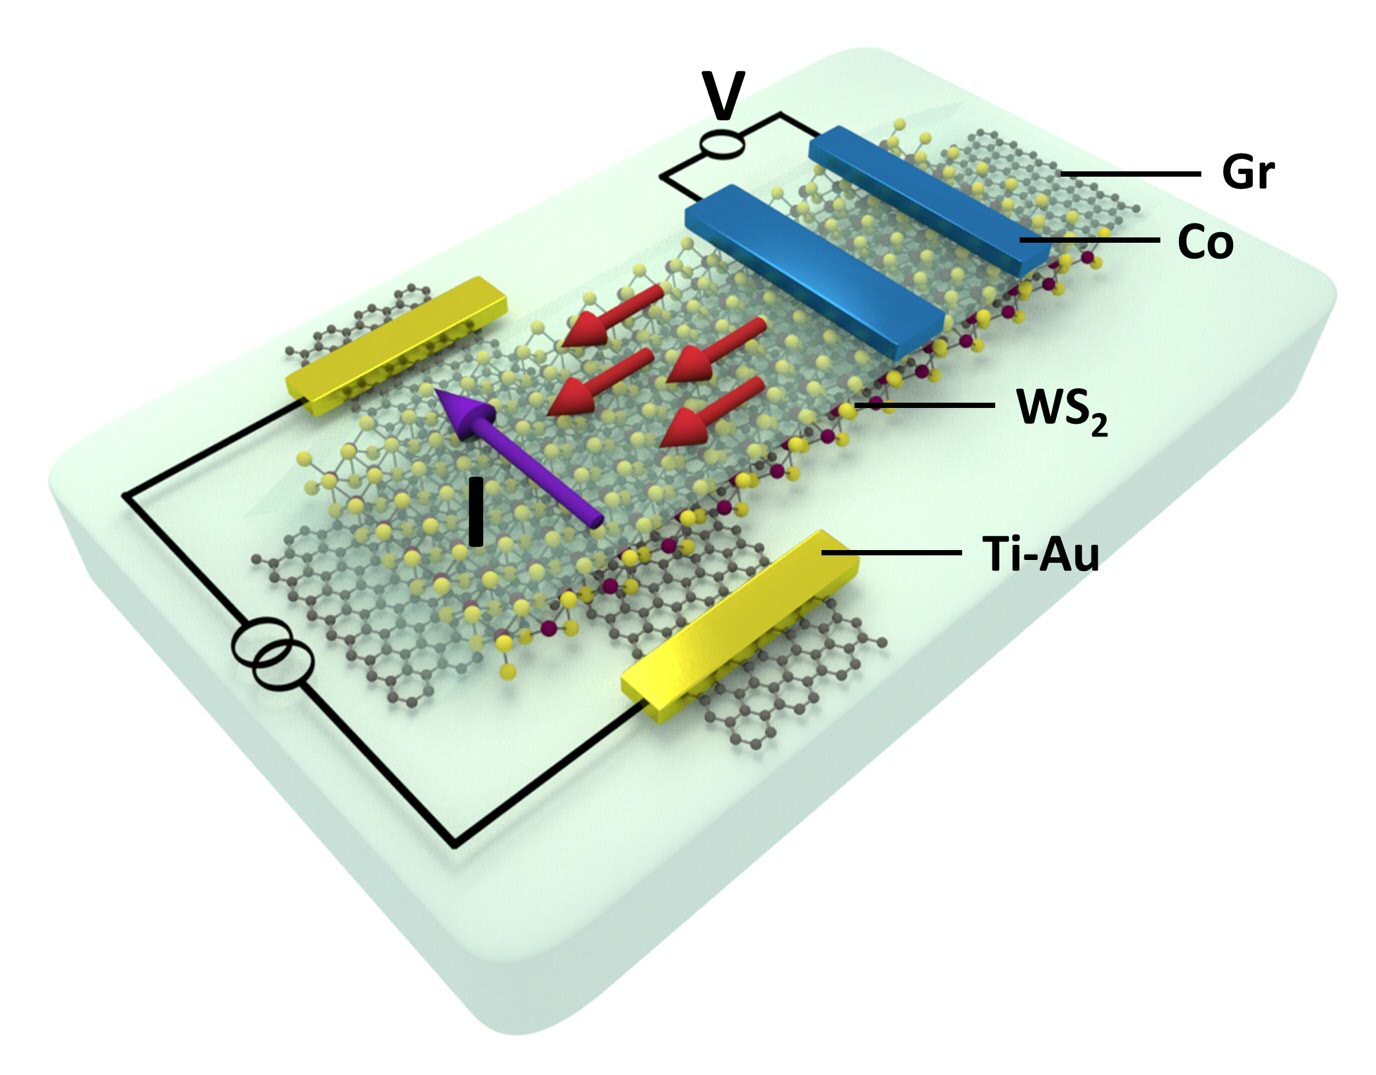 Schematics of the geometry of a nanodevice, used for observation of charge-to-spin conversion in a van der Waals heterostructure of graphene and WS2. The purple and red arrows show charge current and the generated spin accumulation, respectively.